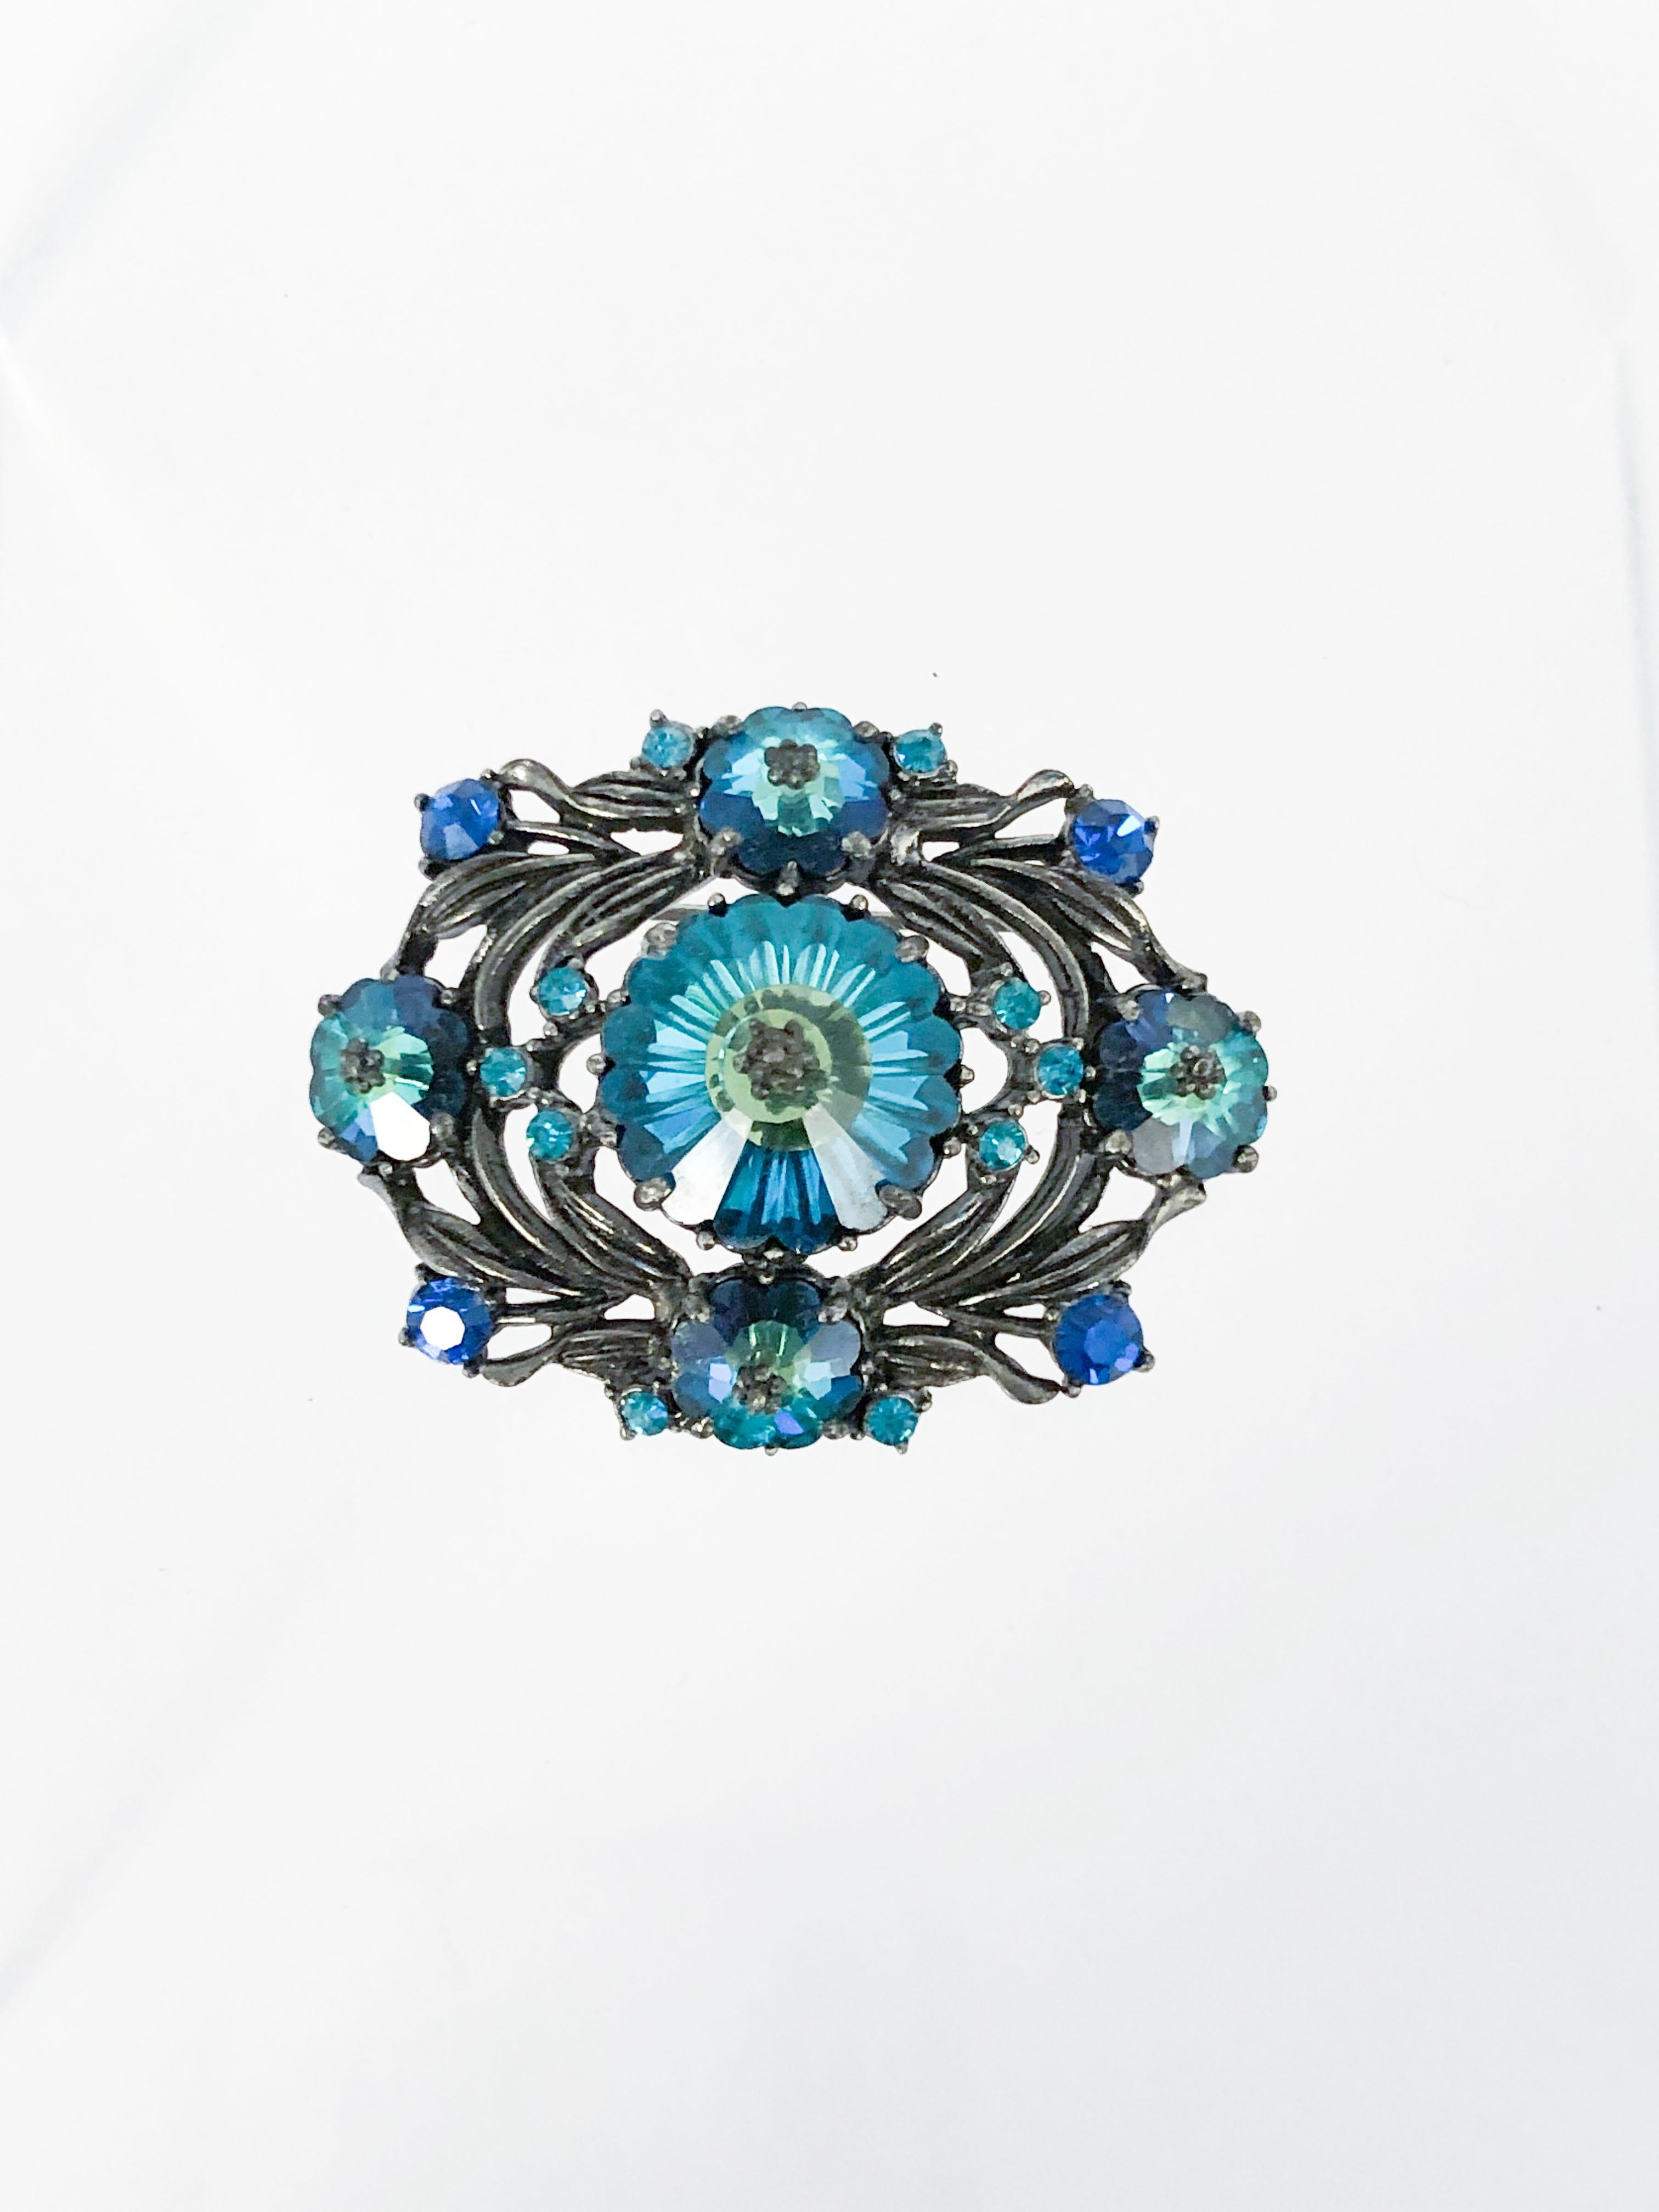 Late 1960s/Early 1970s Weiss brooch with multi-tones of Blues and green rhinestones. The stones are set in a silver-toned metal that is stylistically tarnished for a bohemian look. The back has a standard brooch pin and shows the Weiss hallmark.